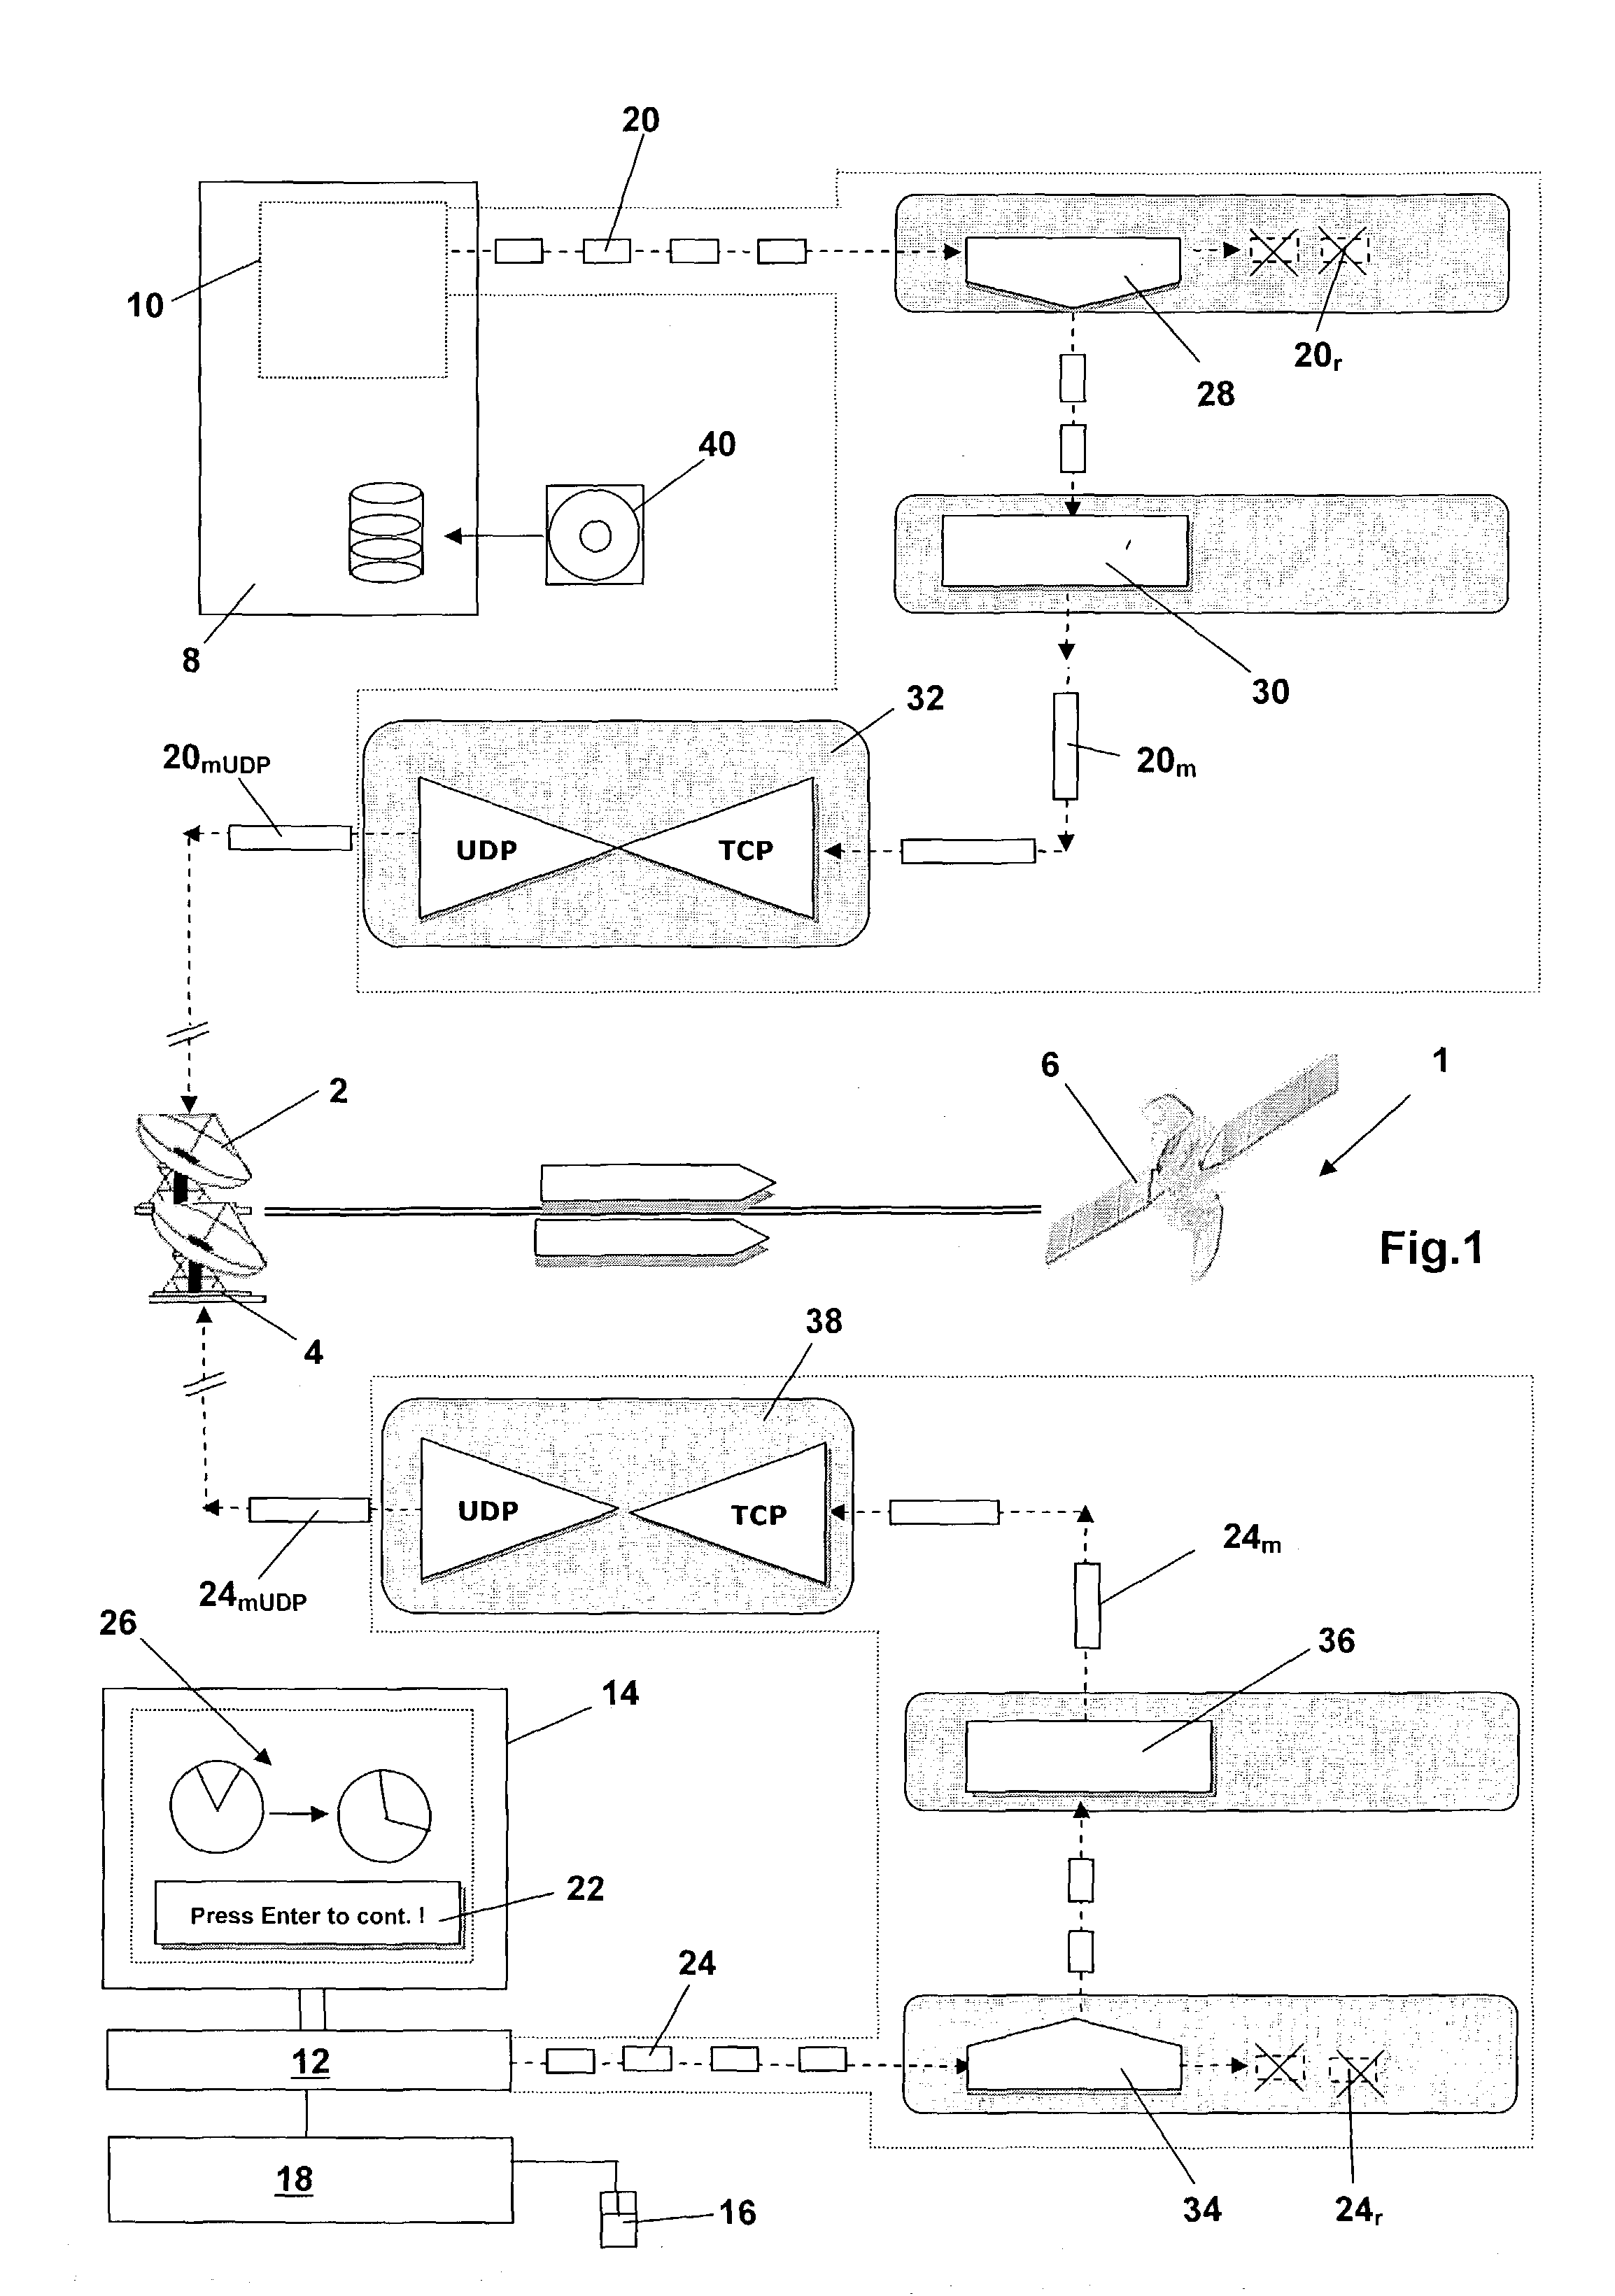 Method for reducing the latency time for interactive data communication via a satellite network